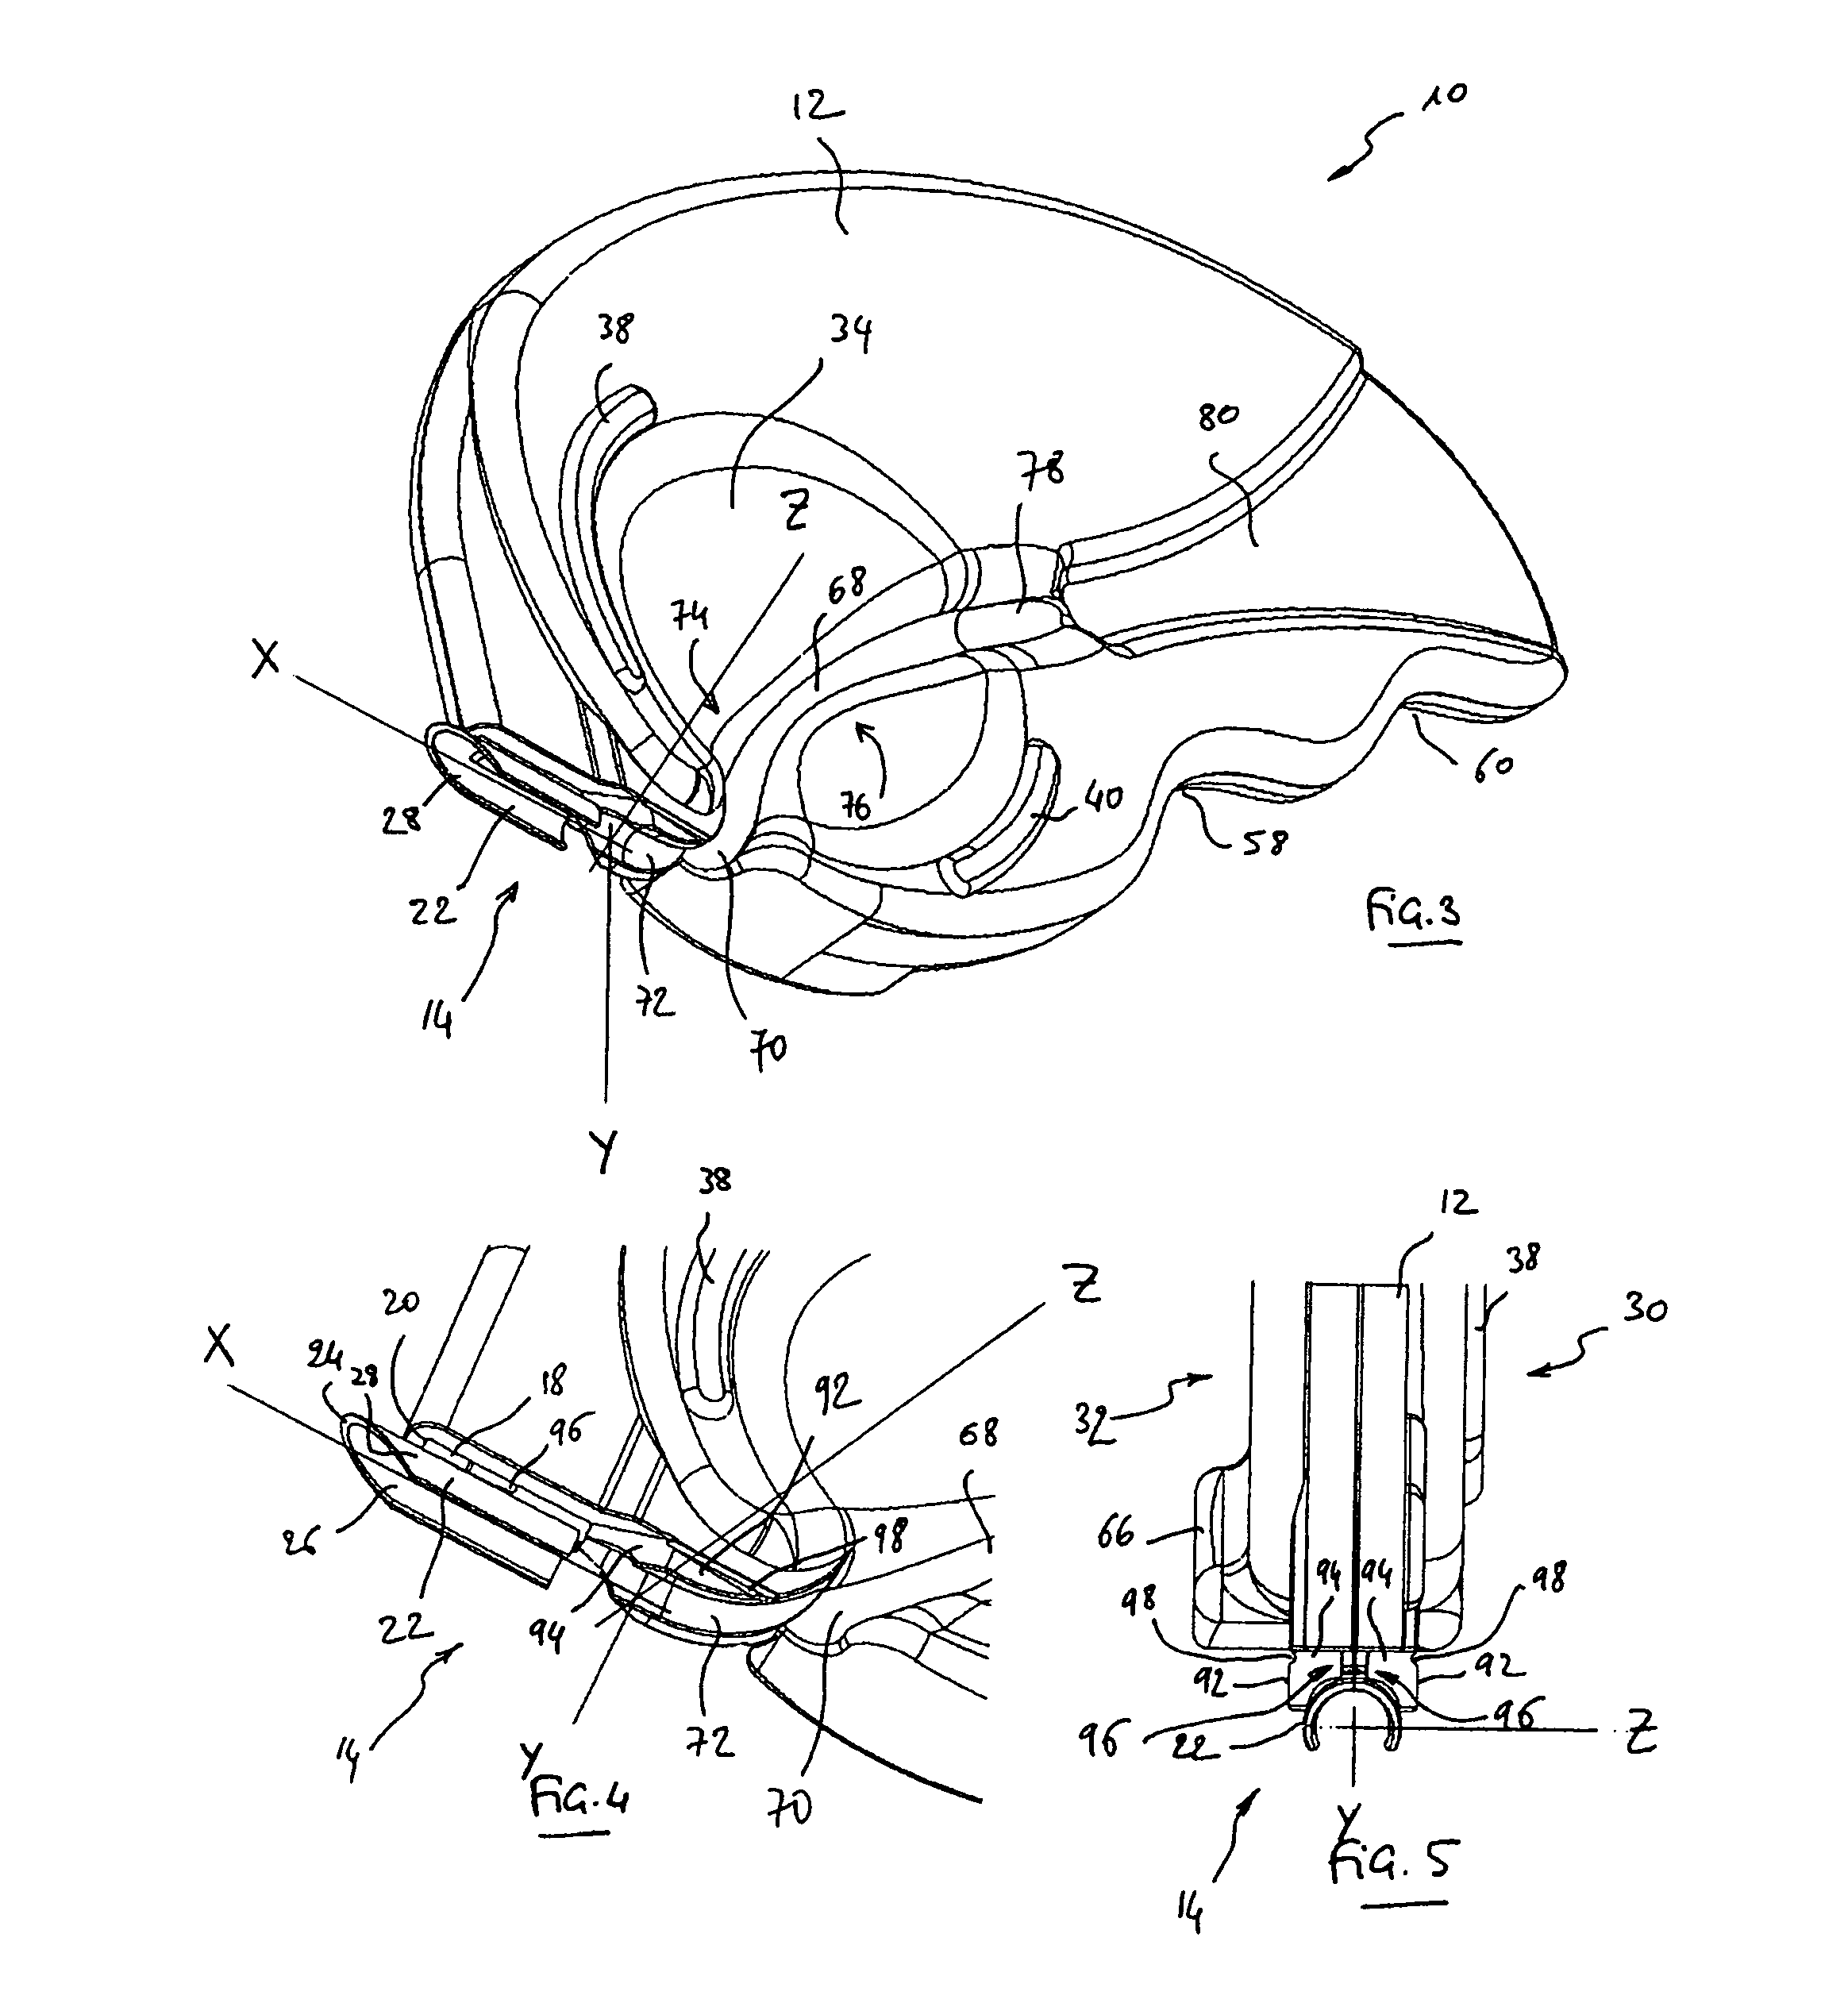 Slitter tool for cutting a tubular sheath of a guide catheter